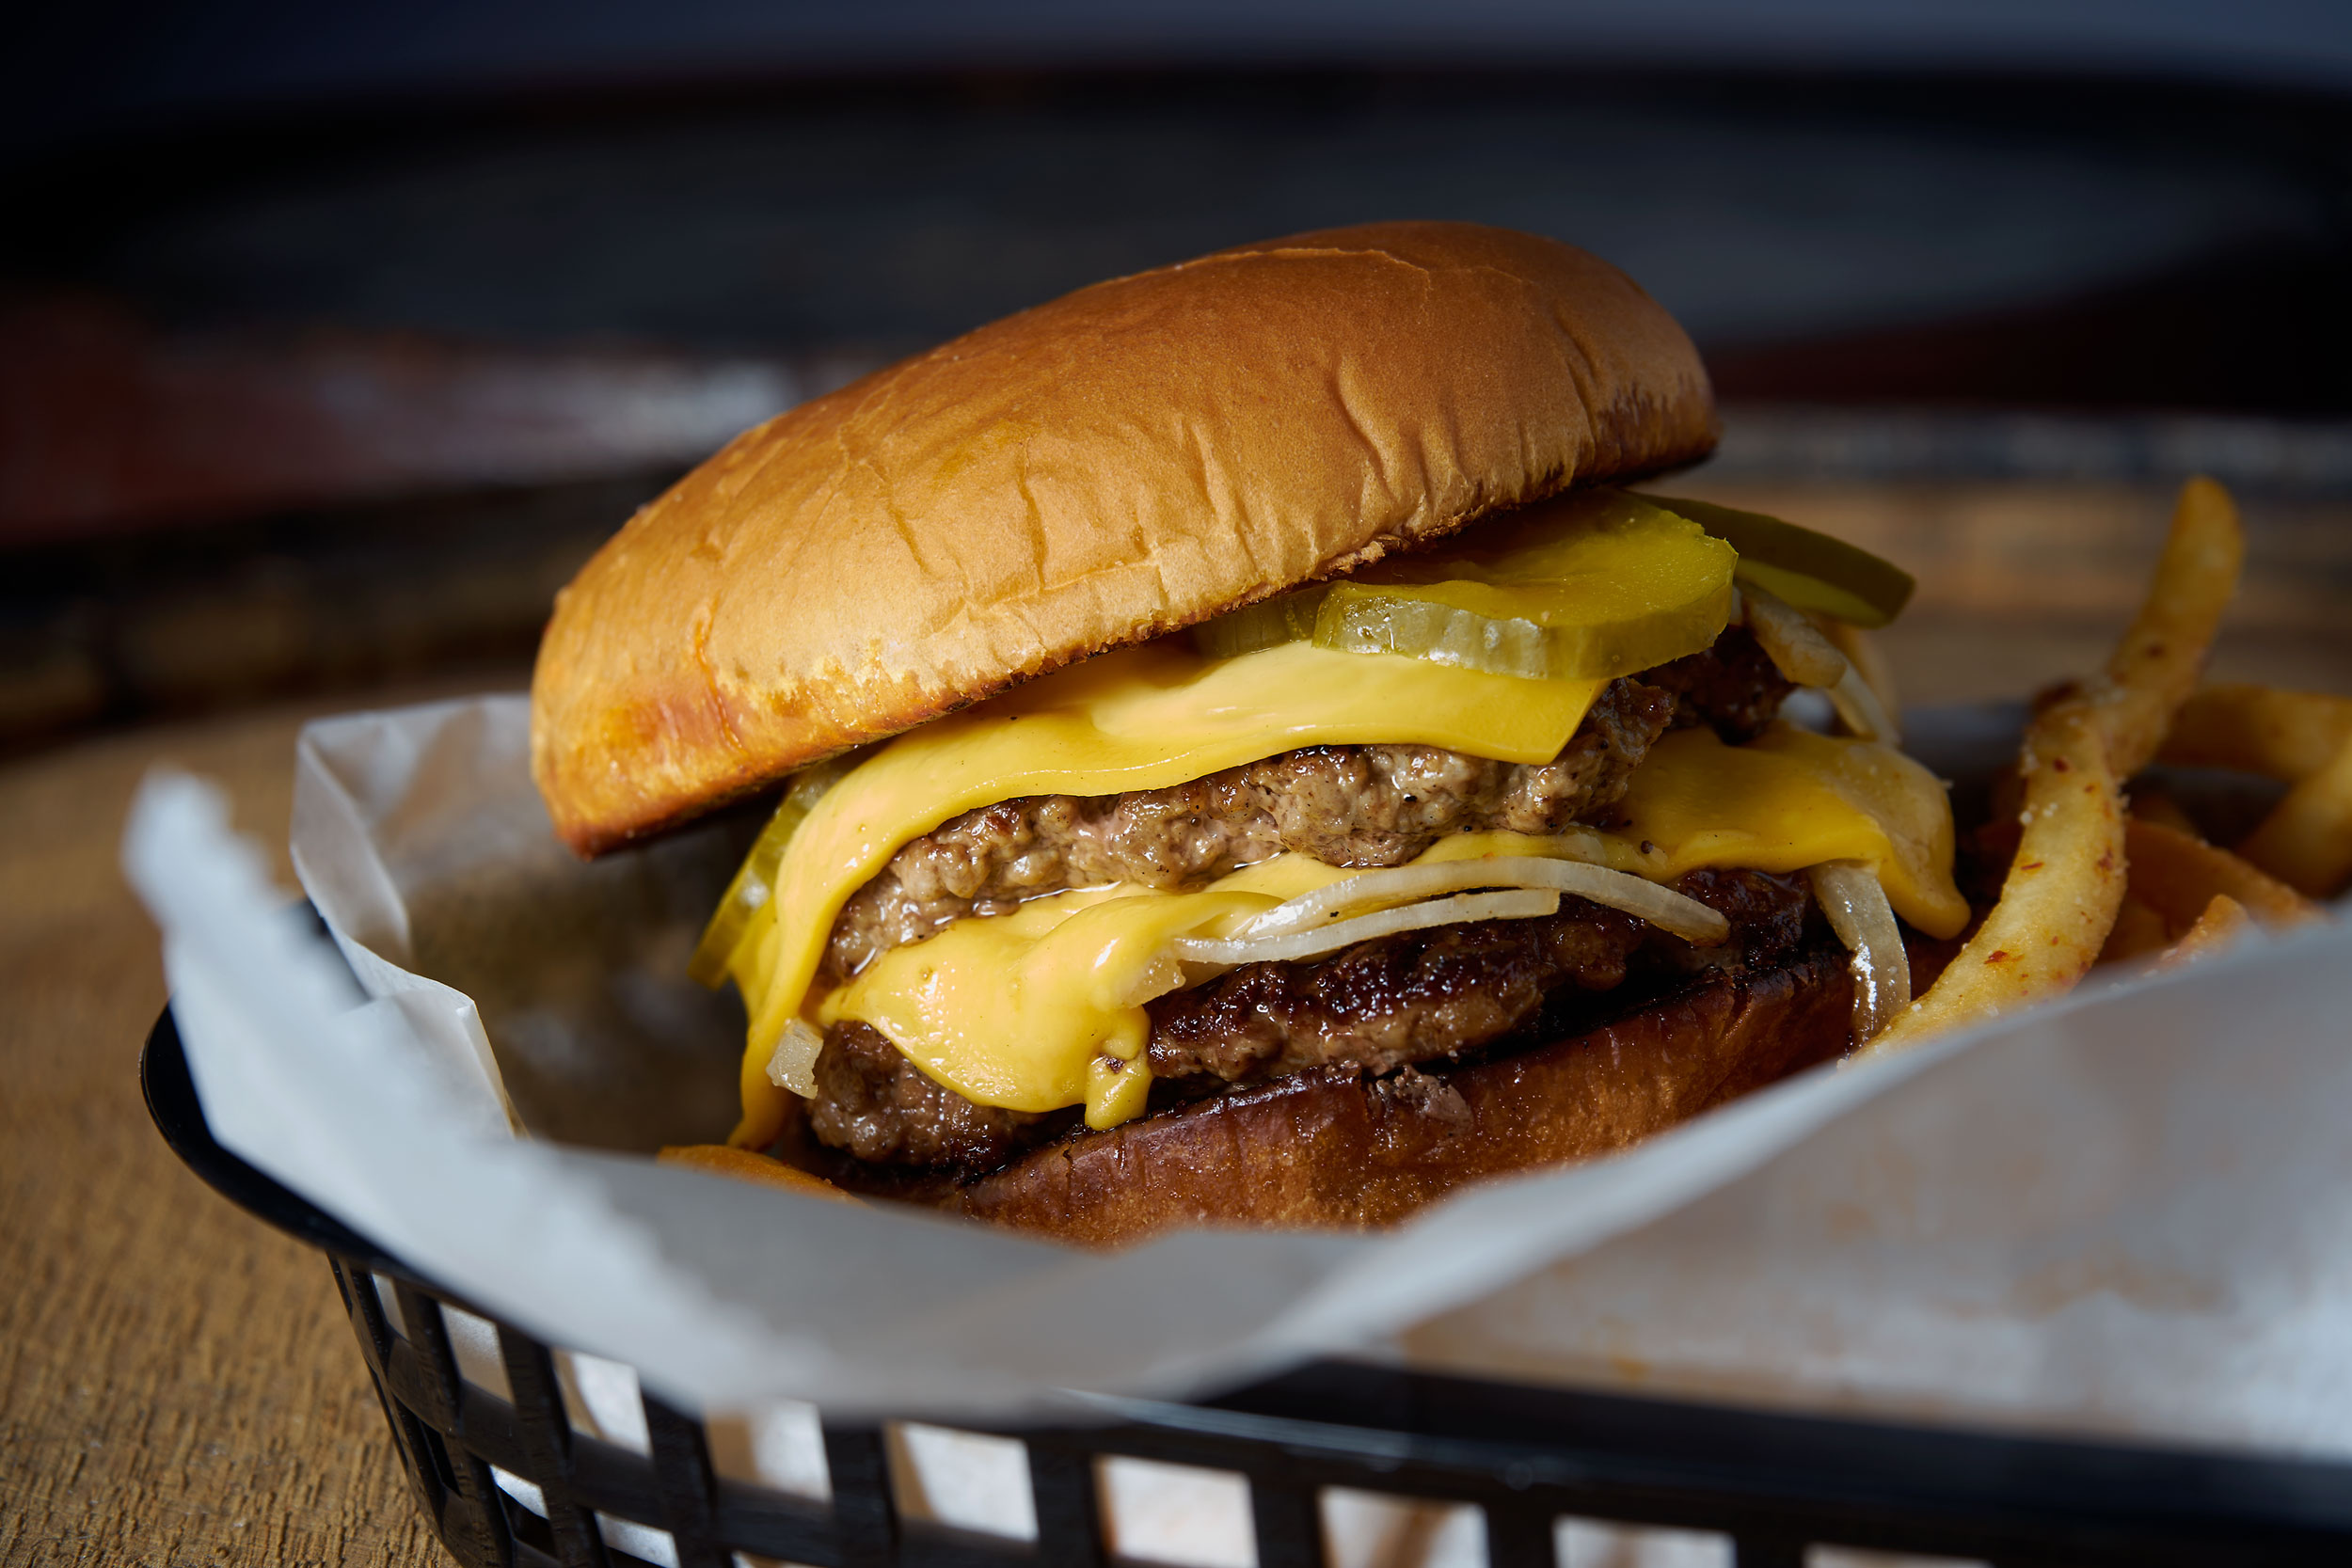   Food Photography for Foxfire Foods Cheeseburgers.